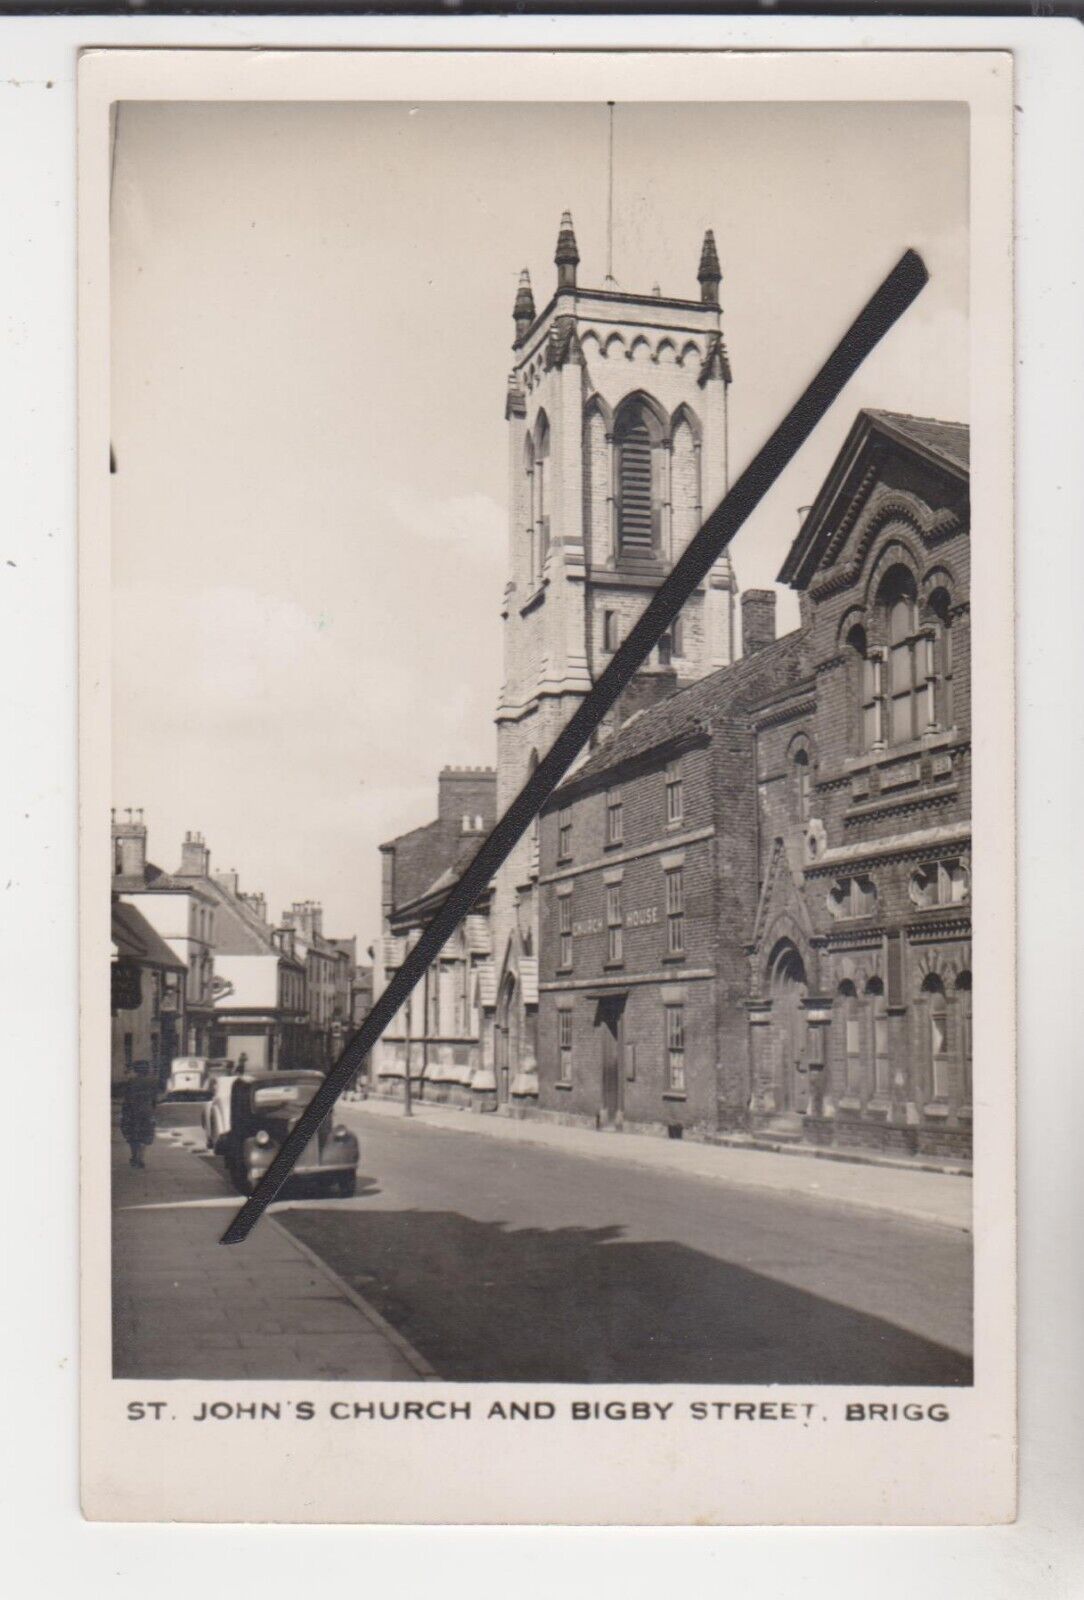 House Clearance - STANLEY SMITH PHOTO POSTCARD ; ST JOHN'S CHURCH AND BIGBY STREET, BRIGG